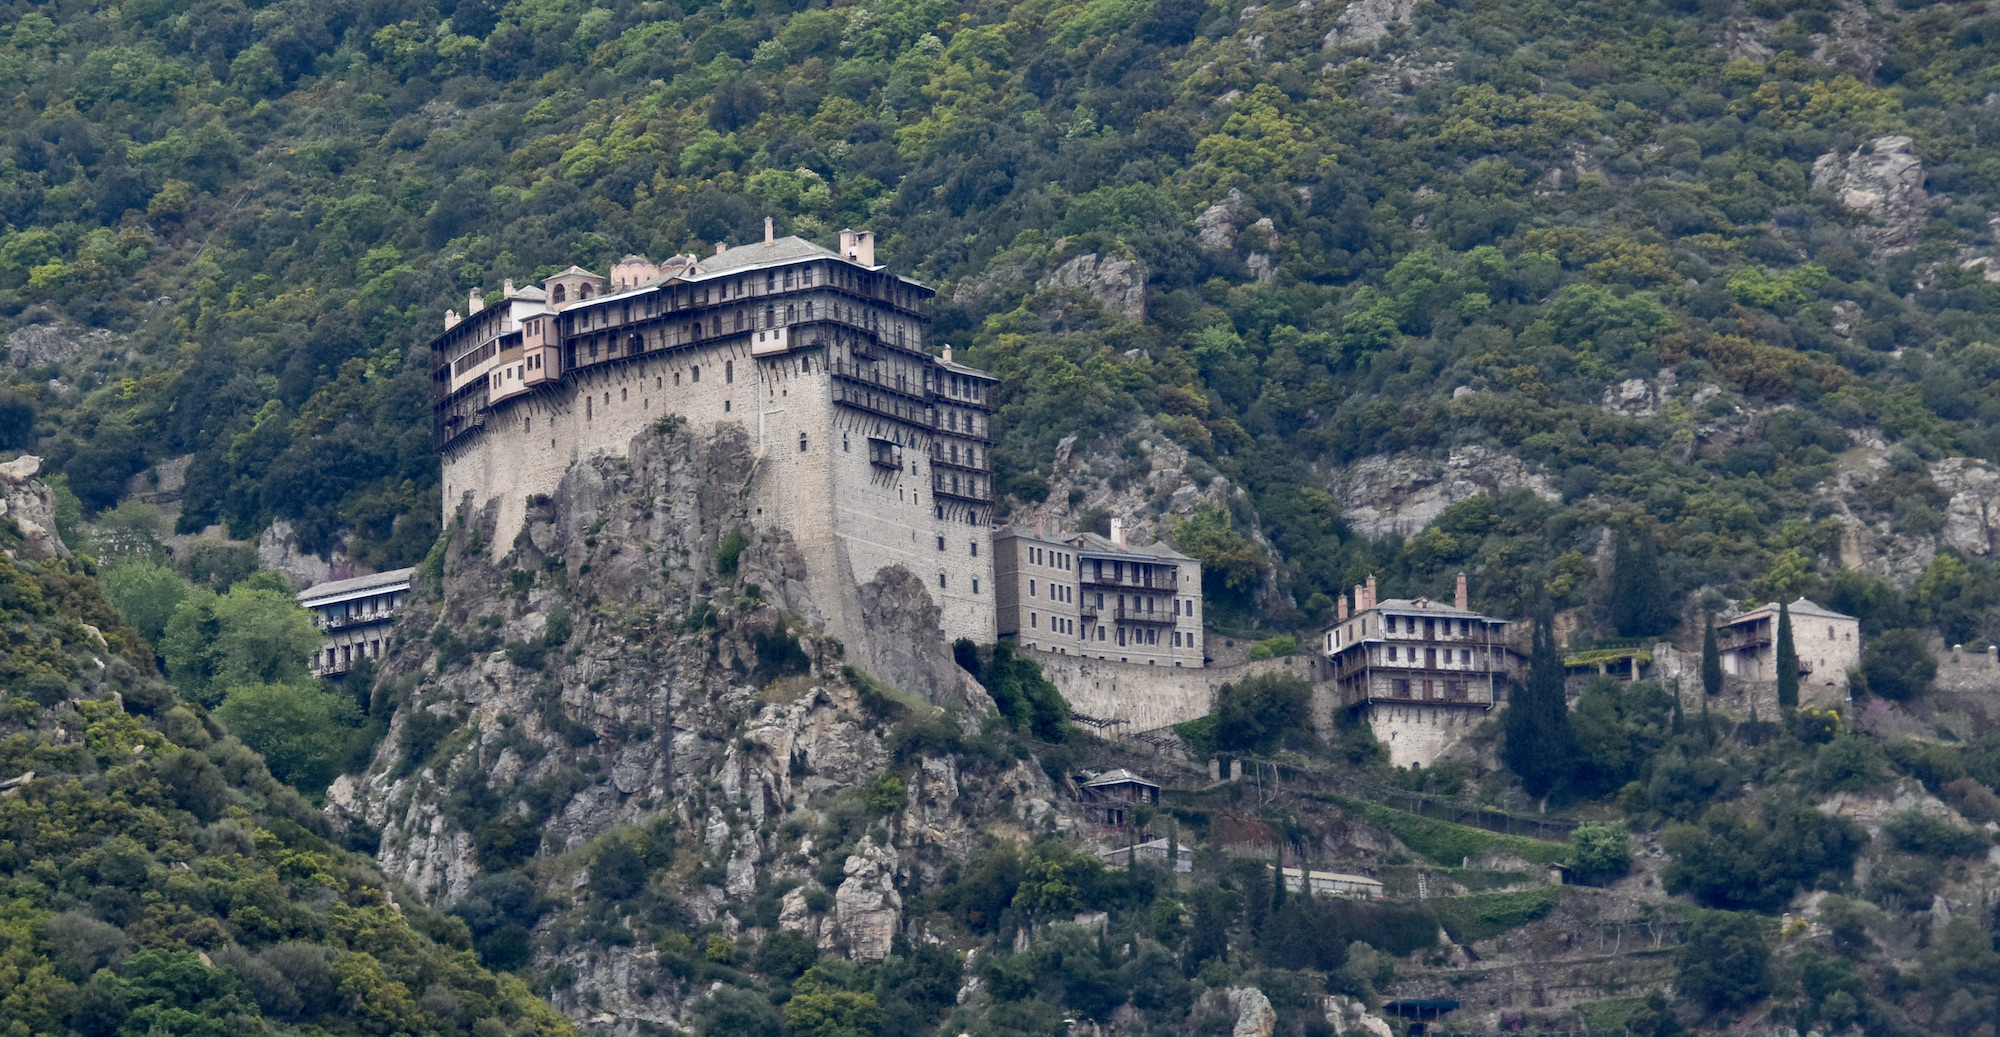 ORTHODOX CHRISTIANITY THEN AND NOW: The Three Gifts of the Magi On Mount  Athos